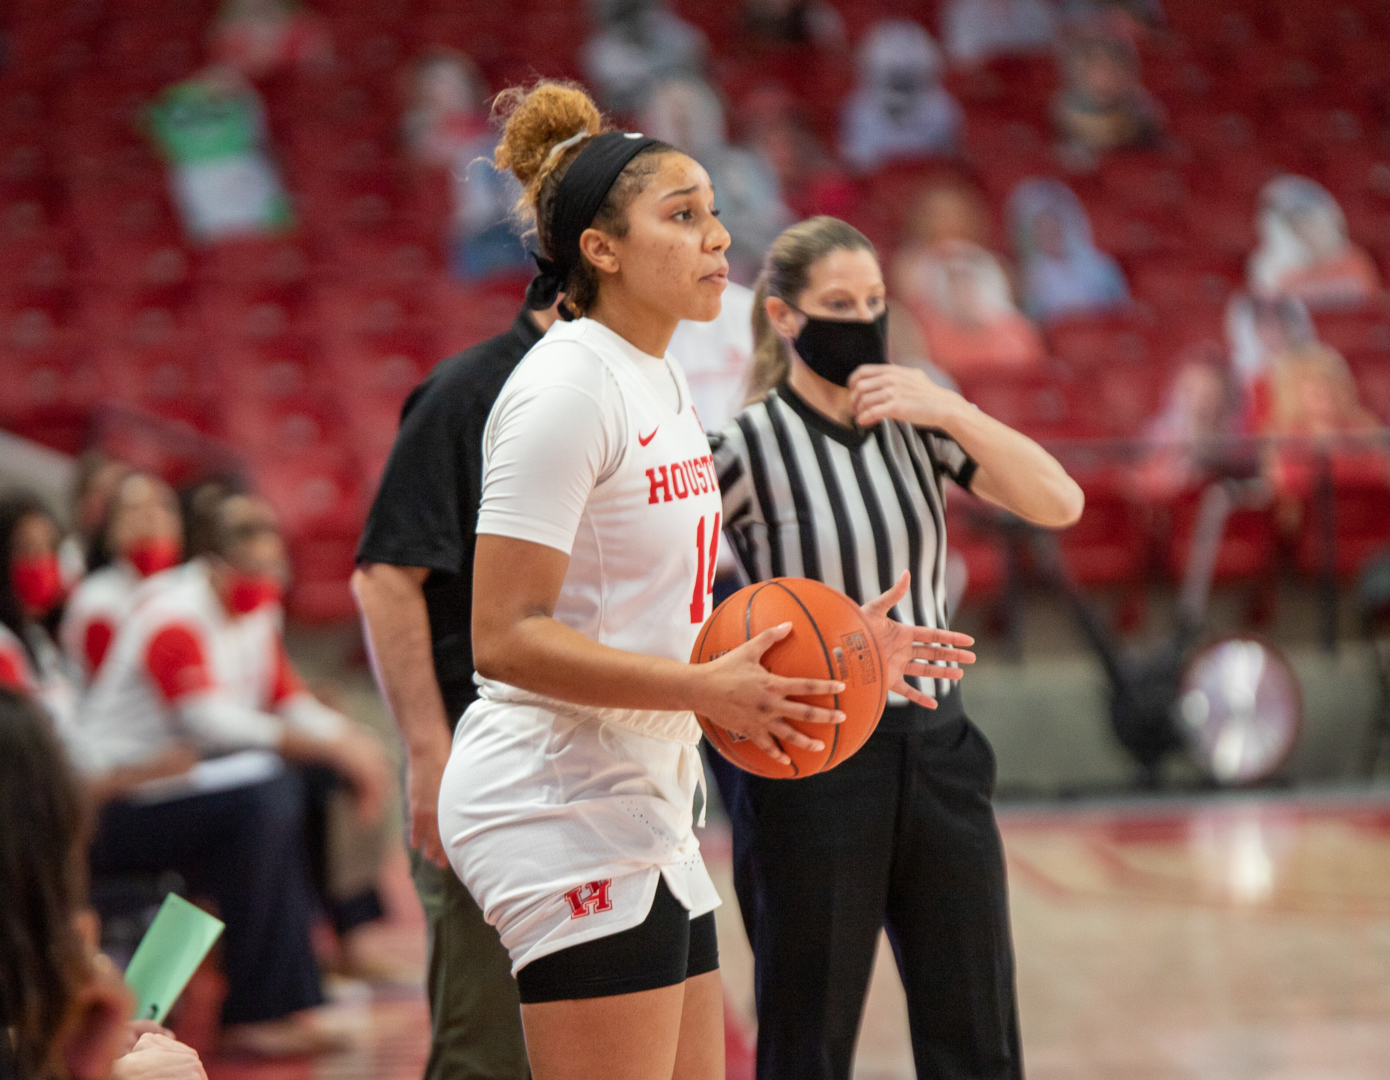 Freshman guard Laila Blair led UH women's basketball in scoring with 11 points in the loss against UCF. | Andy Yanez/The Cougar